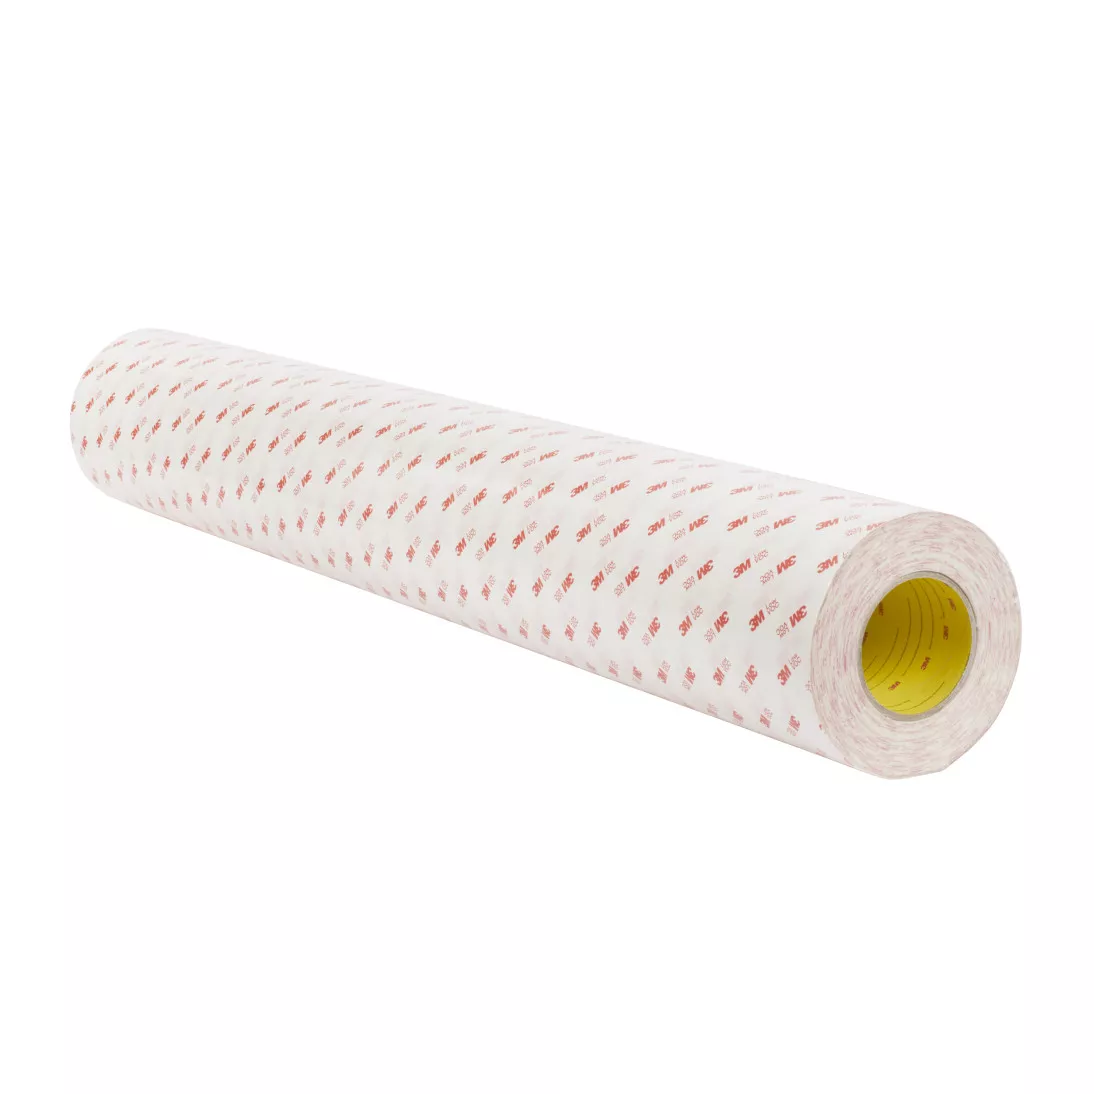 3M™ Low VOC Double Coated Tissue Tape 99015LVC, Clear, 1000 mm x 50 m, 0.15 mm, 1 Roll/ Case